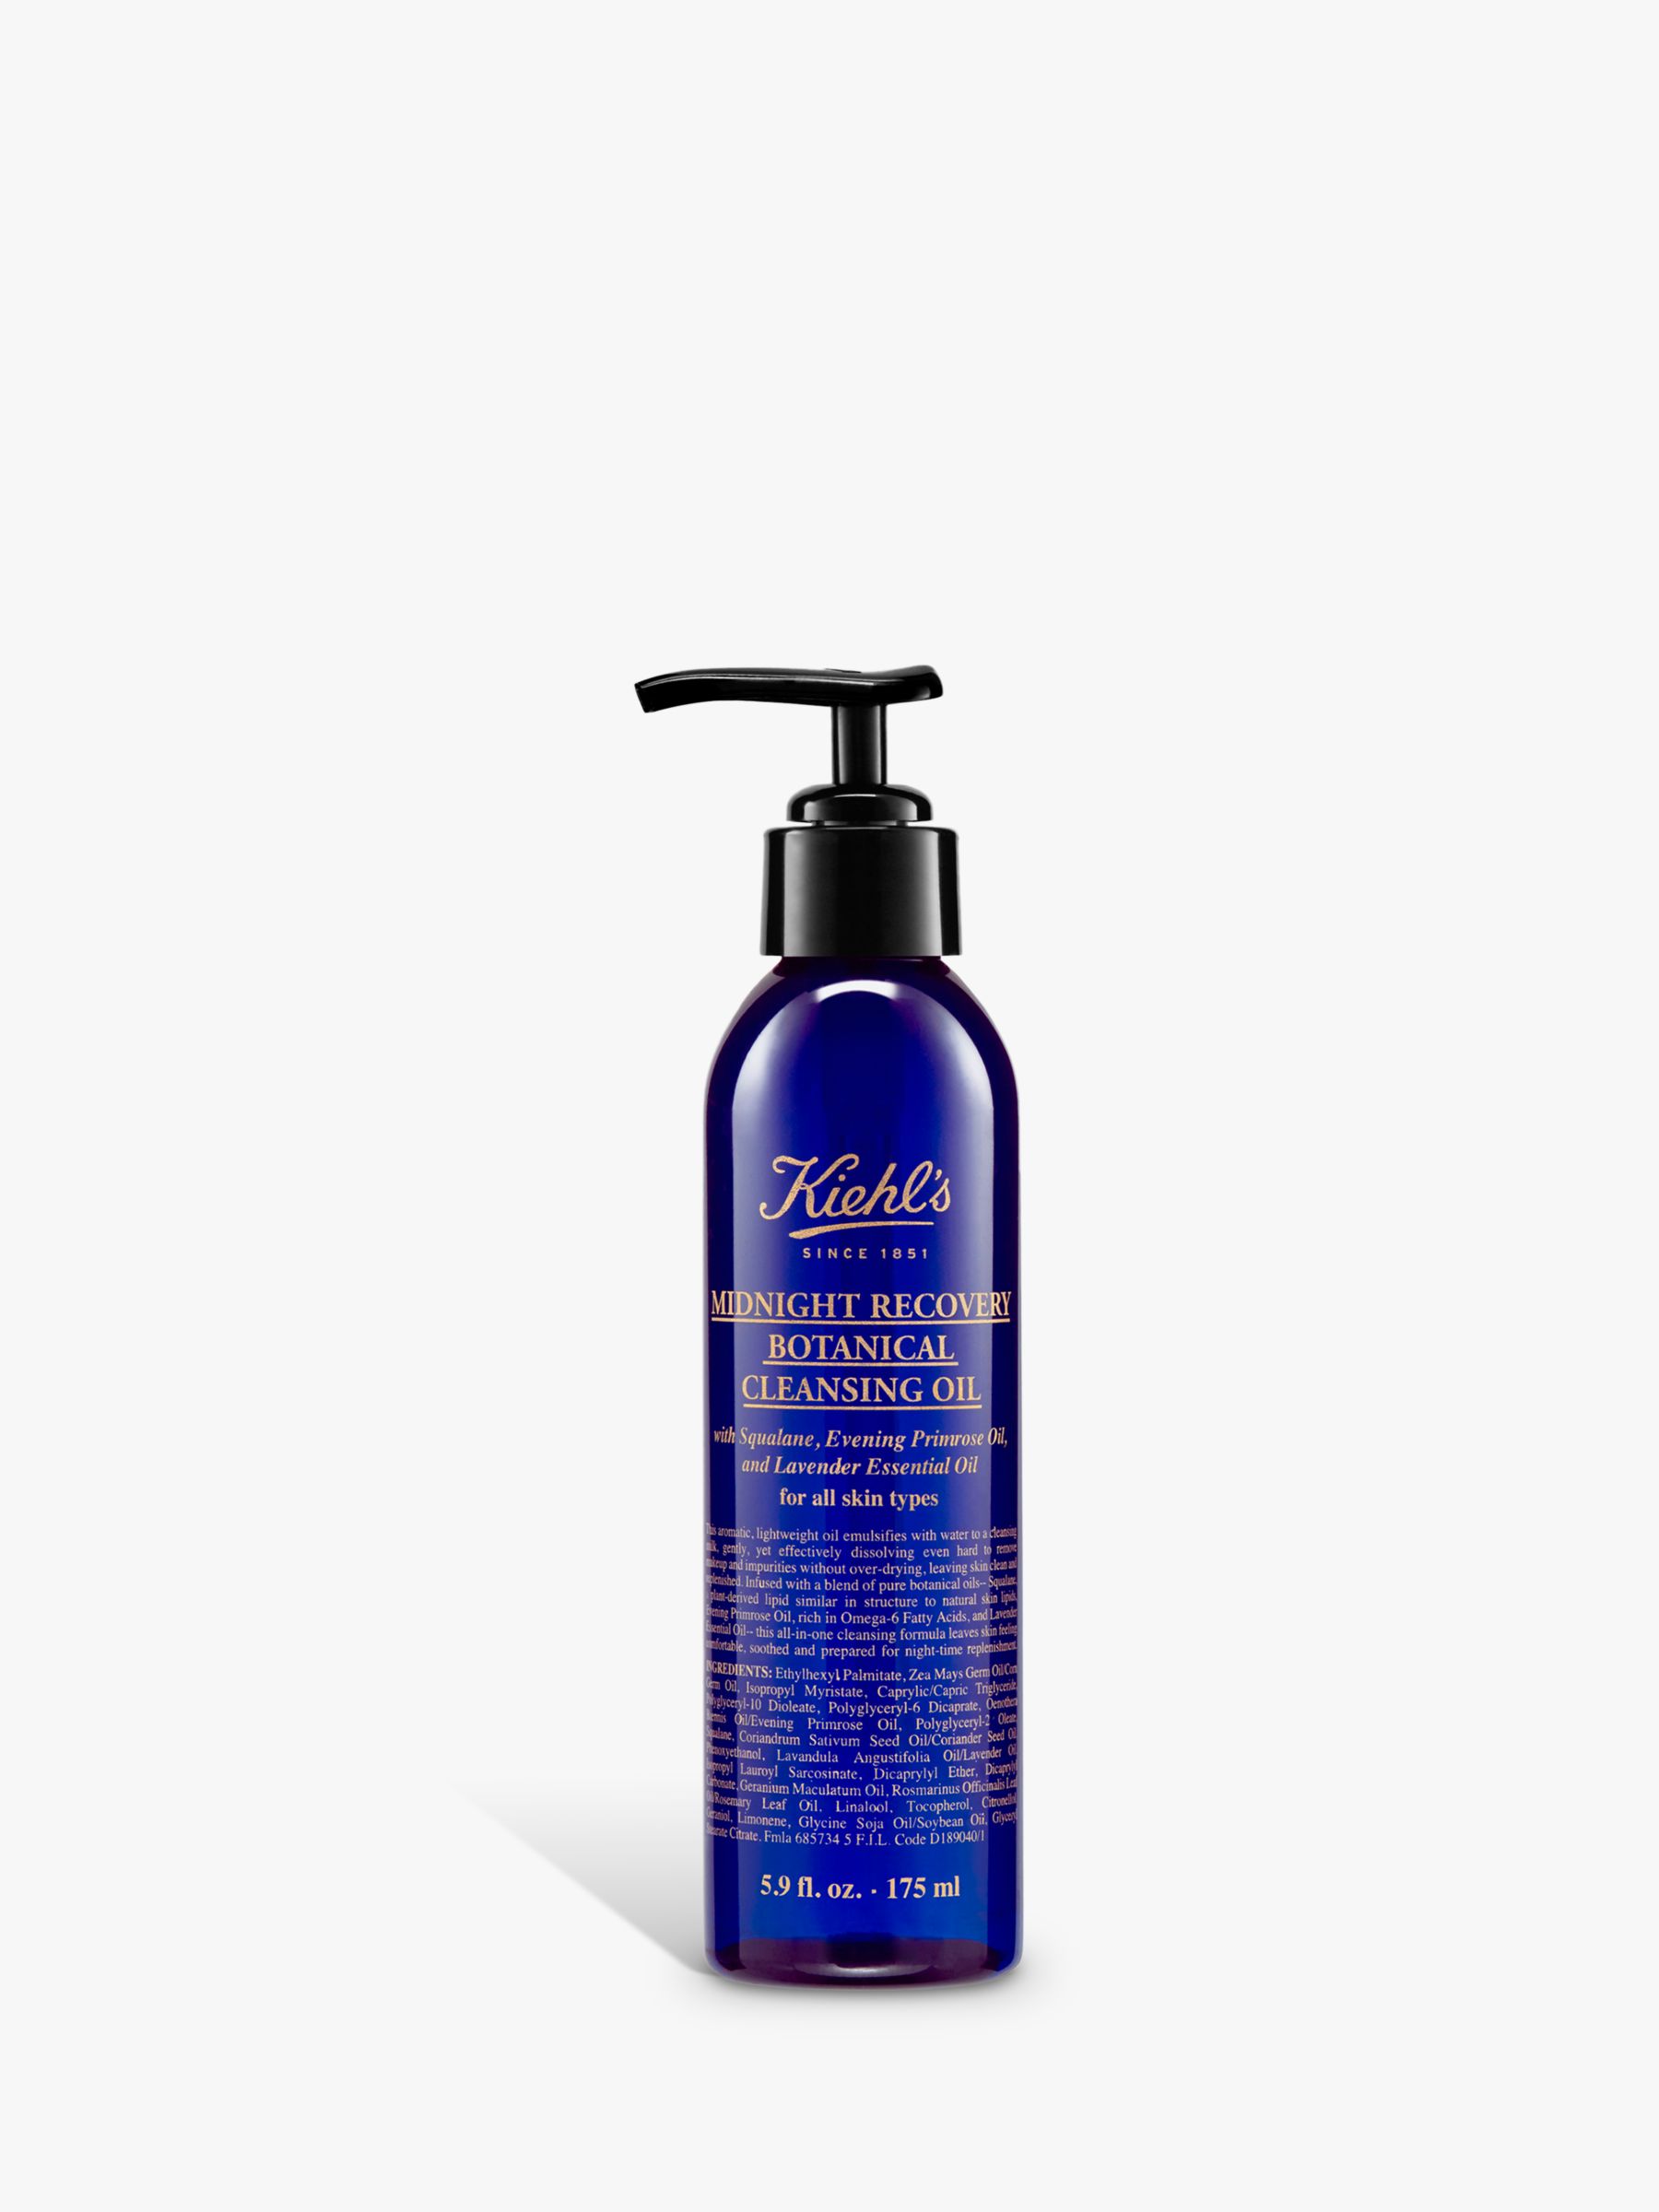 Dầu tẩy trang Kiehl’s Midnight Recovery Botanical Cleansing Oil.